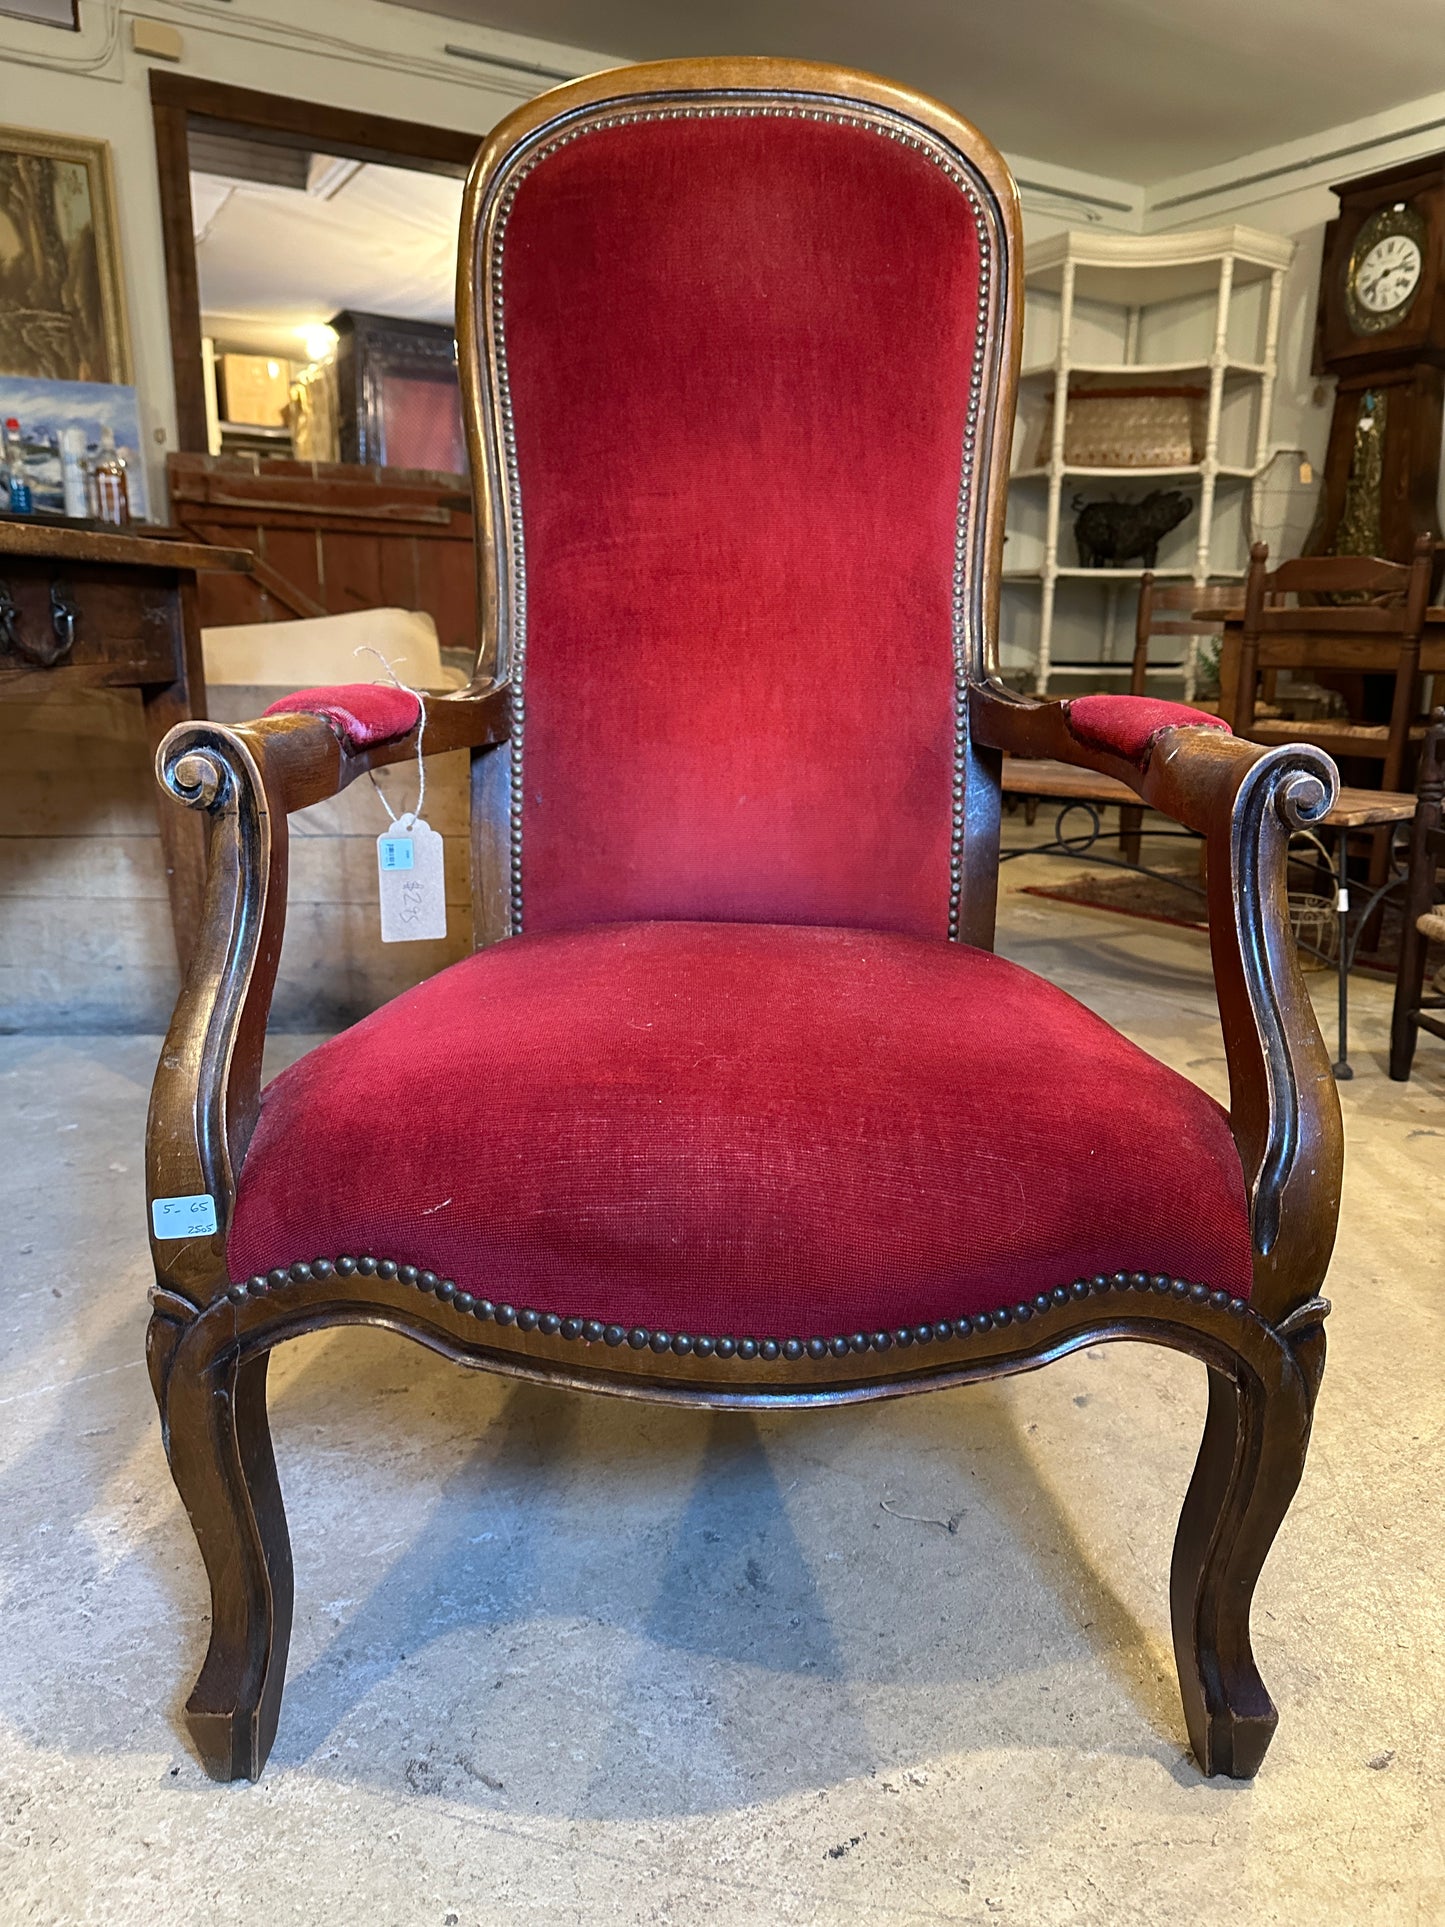 Voltaire rouge chair